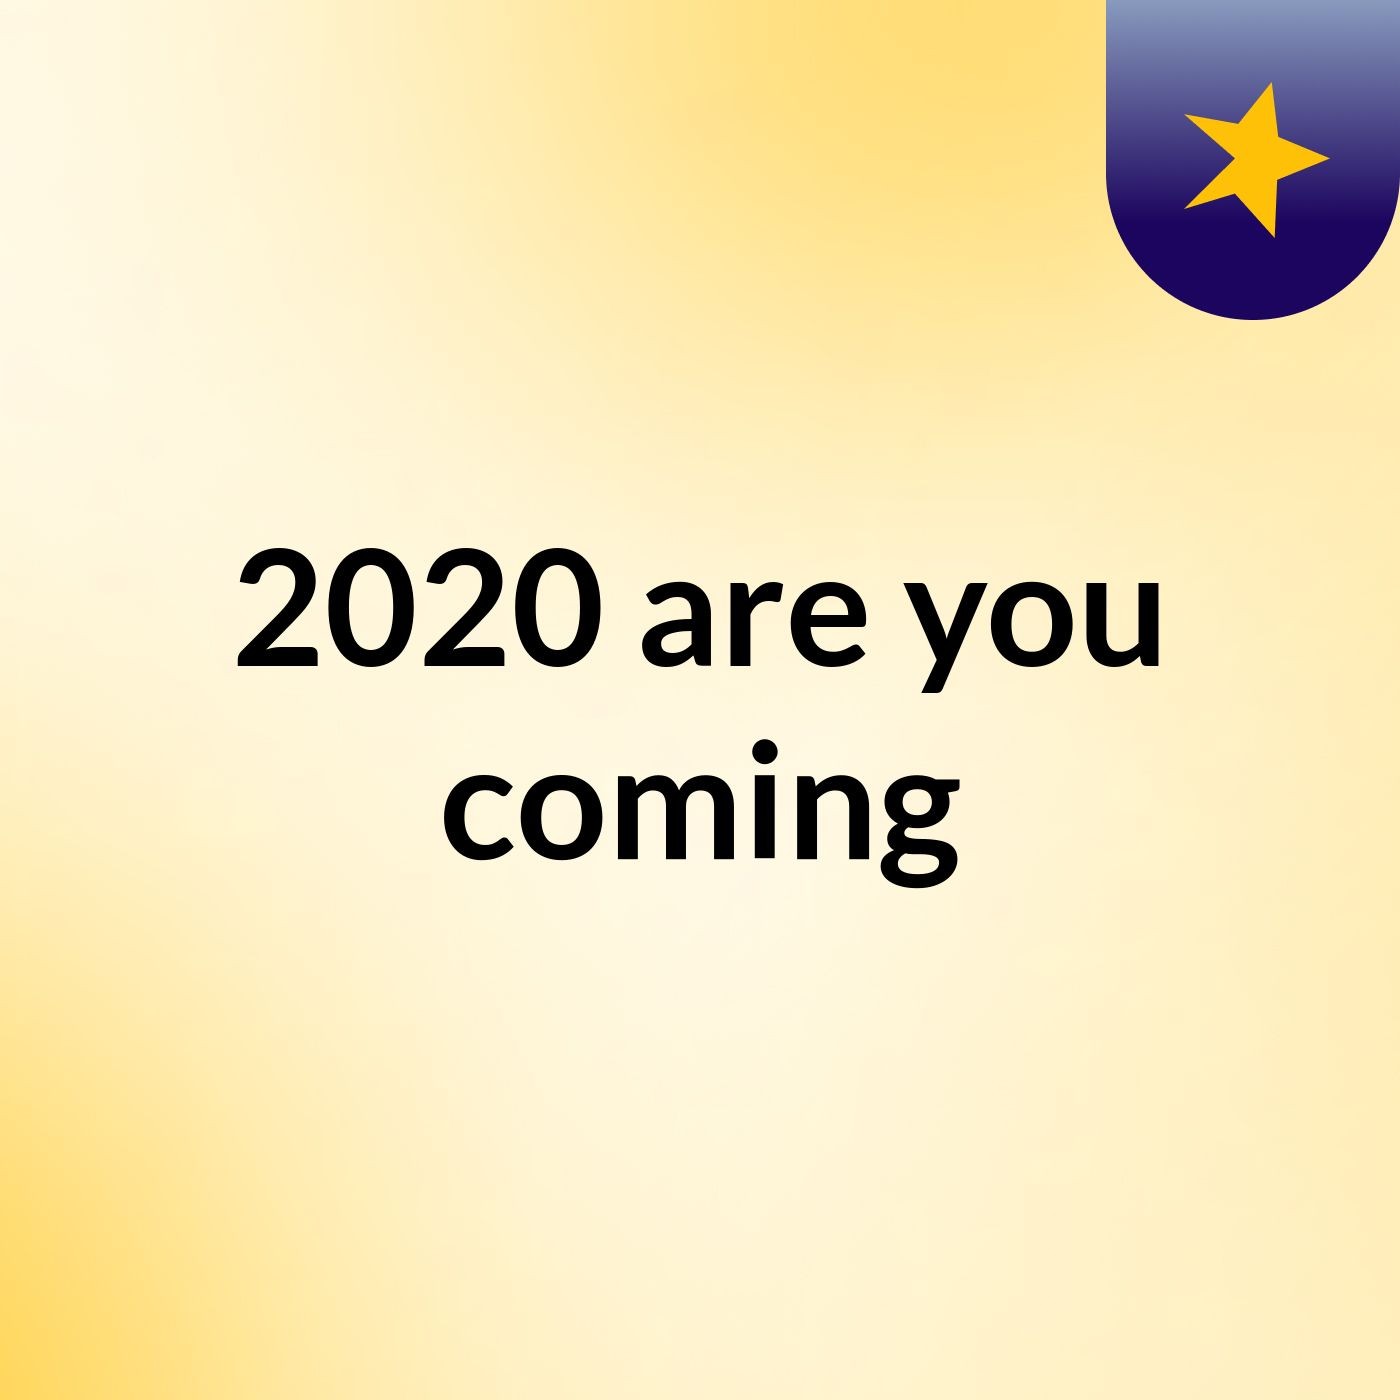 2020 are you coming